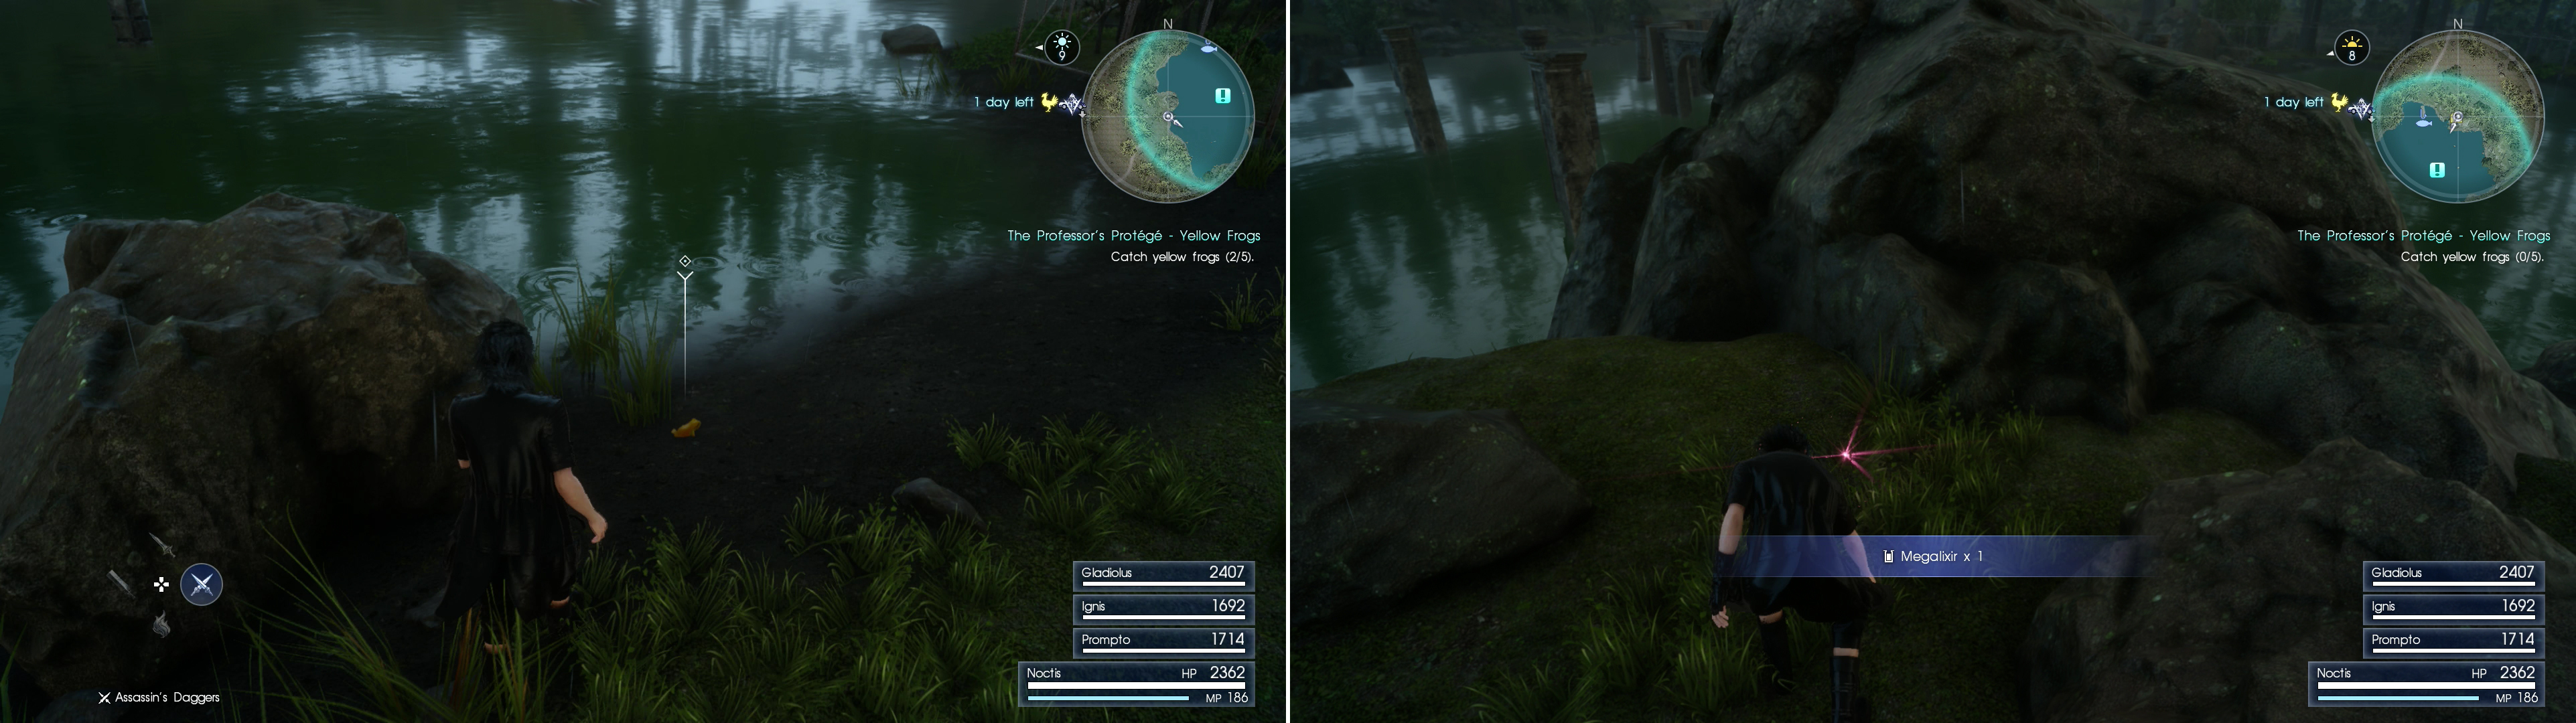 Search around the Forgotten Pool Fishing Spot to find yellow frogs (left), and while you’re here, search a Treasure Spot to find a Megalixir (right).